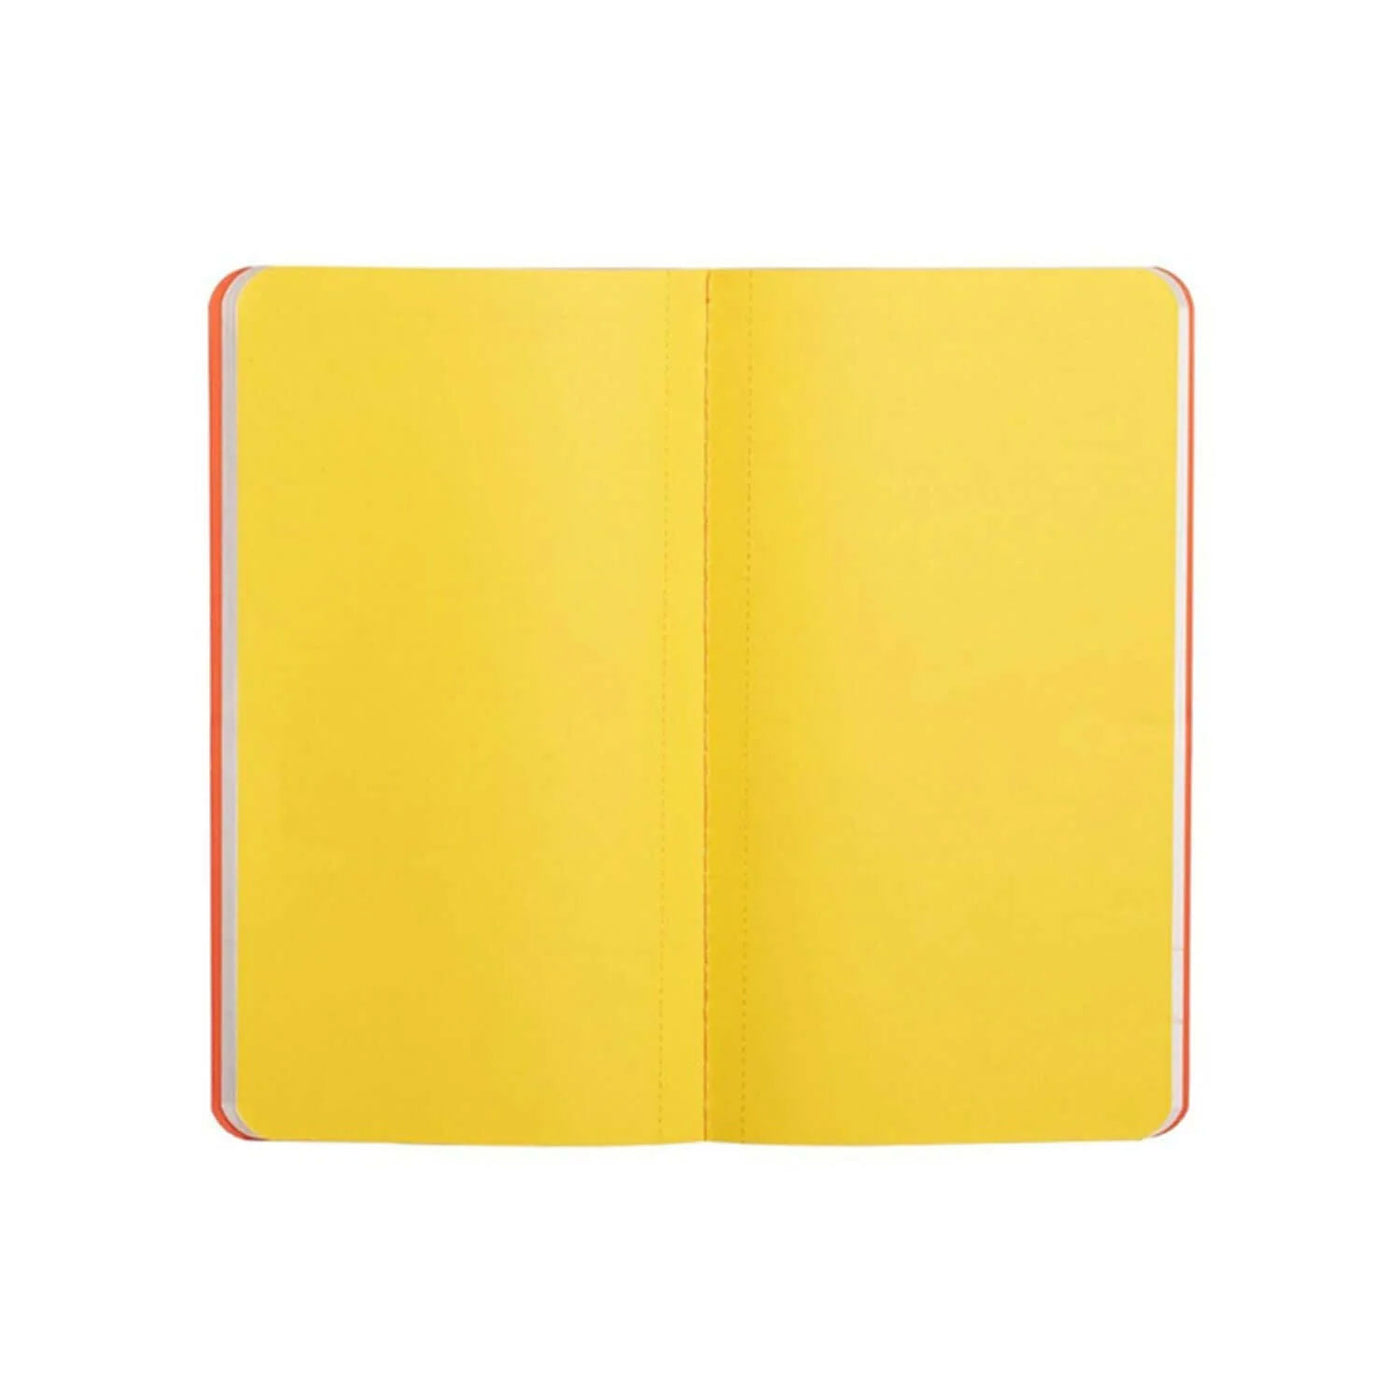 Pennline Quikfill Notebook Refill For Quikrite, Orange - Set Of 2 6